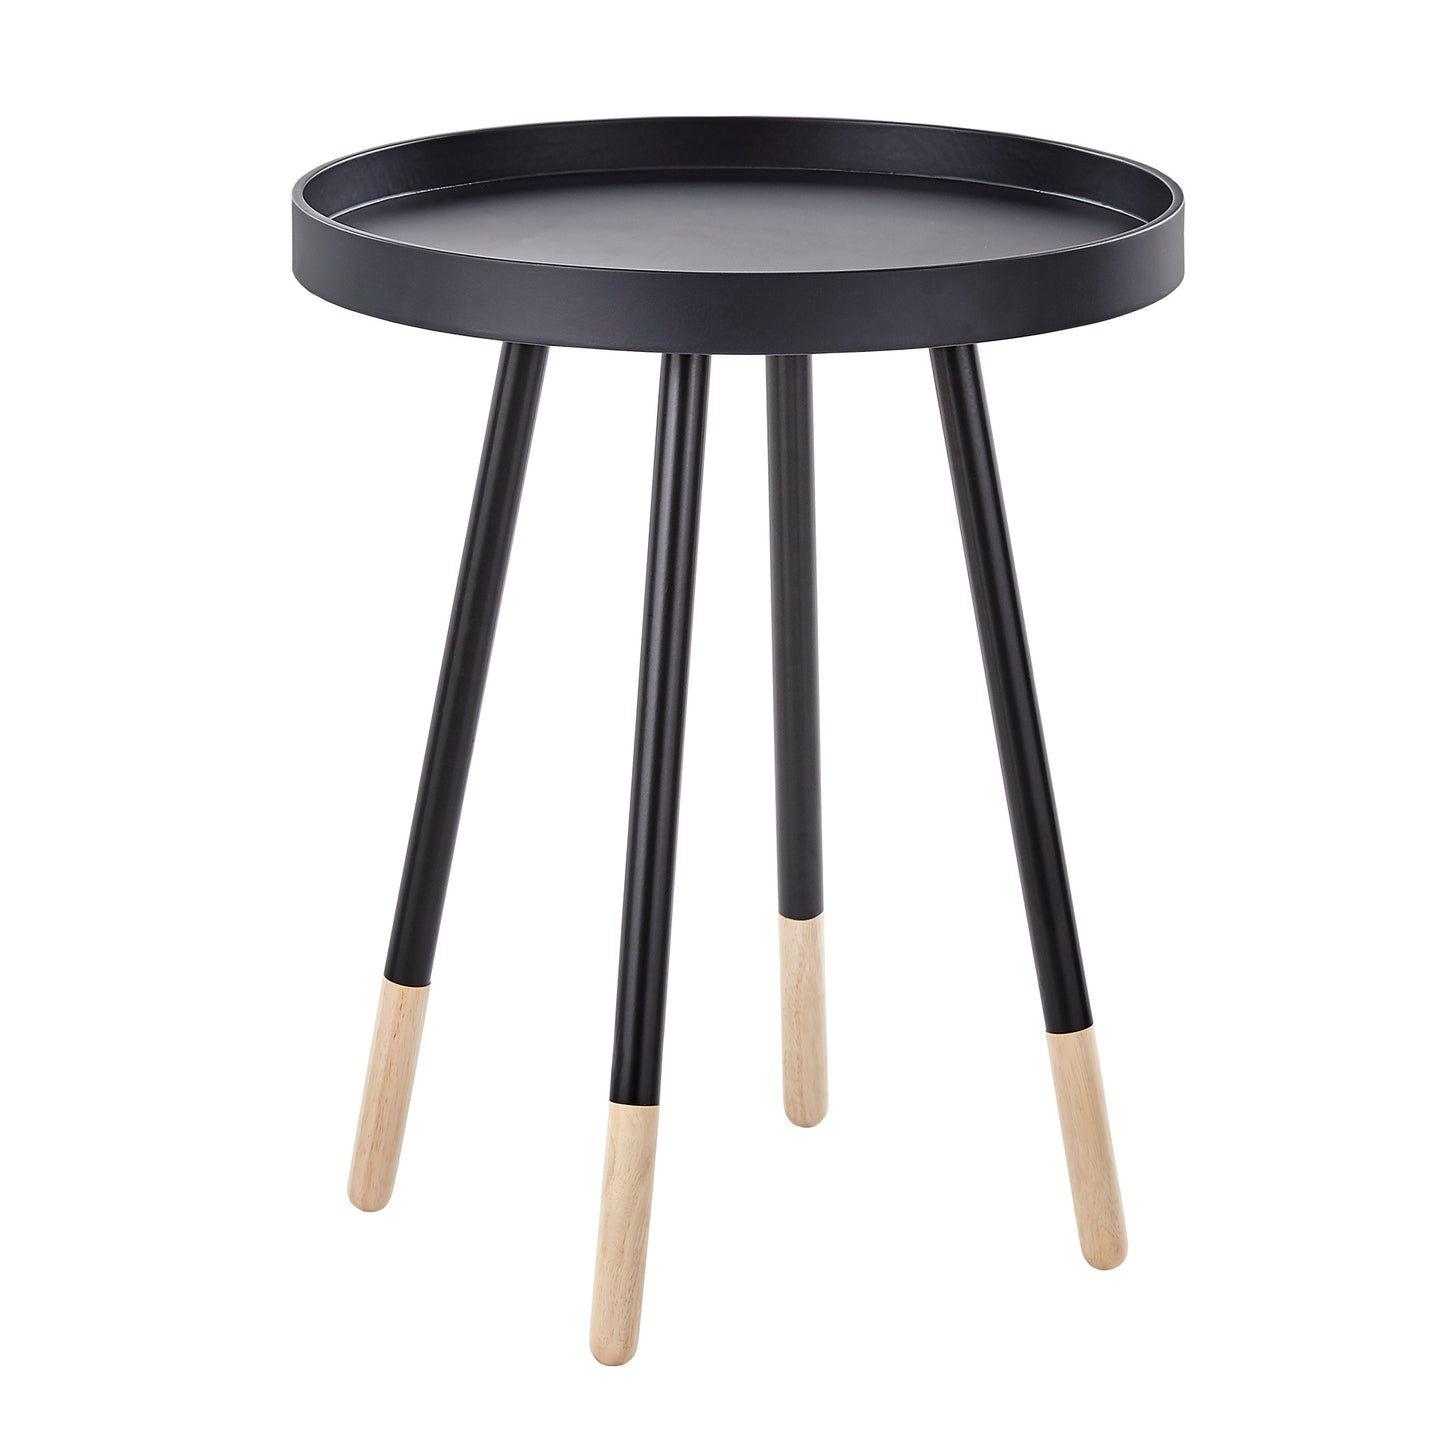 Paint-Dipped Round Tray-Top End Table - Vulcan Black